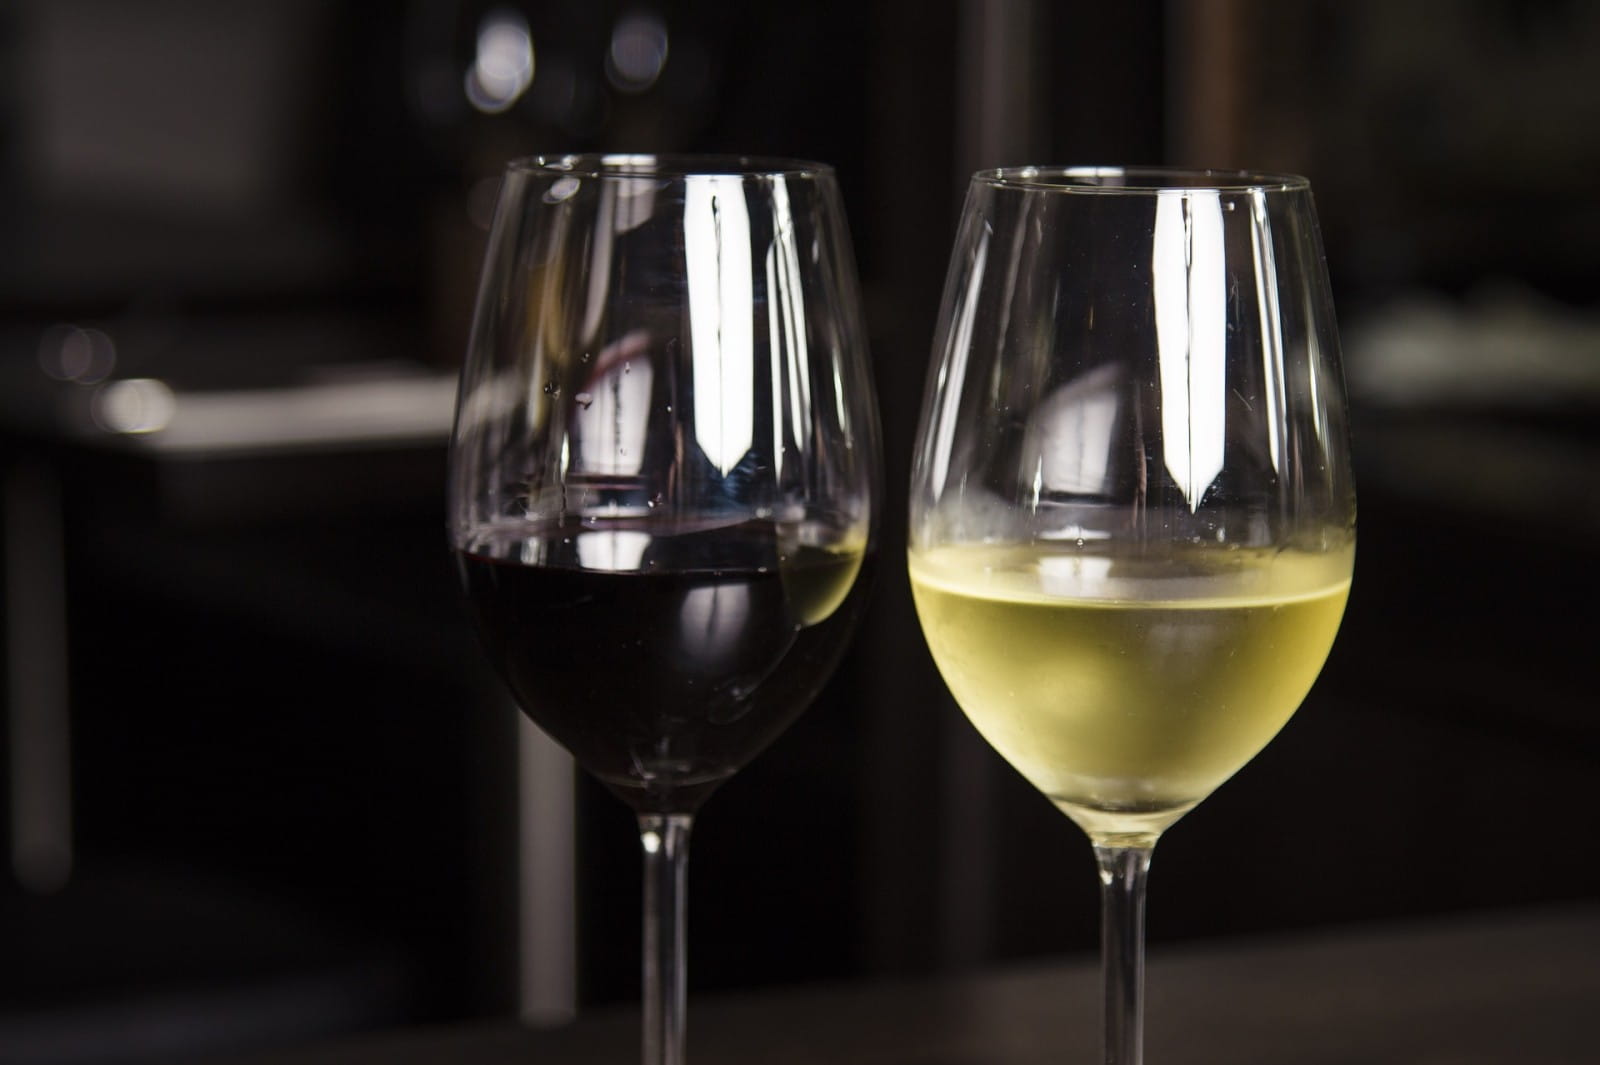 What sort of wine glasses should you buy?